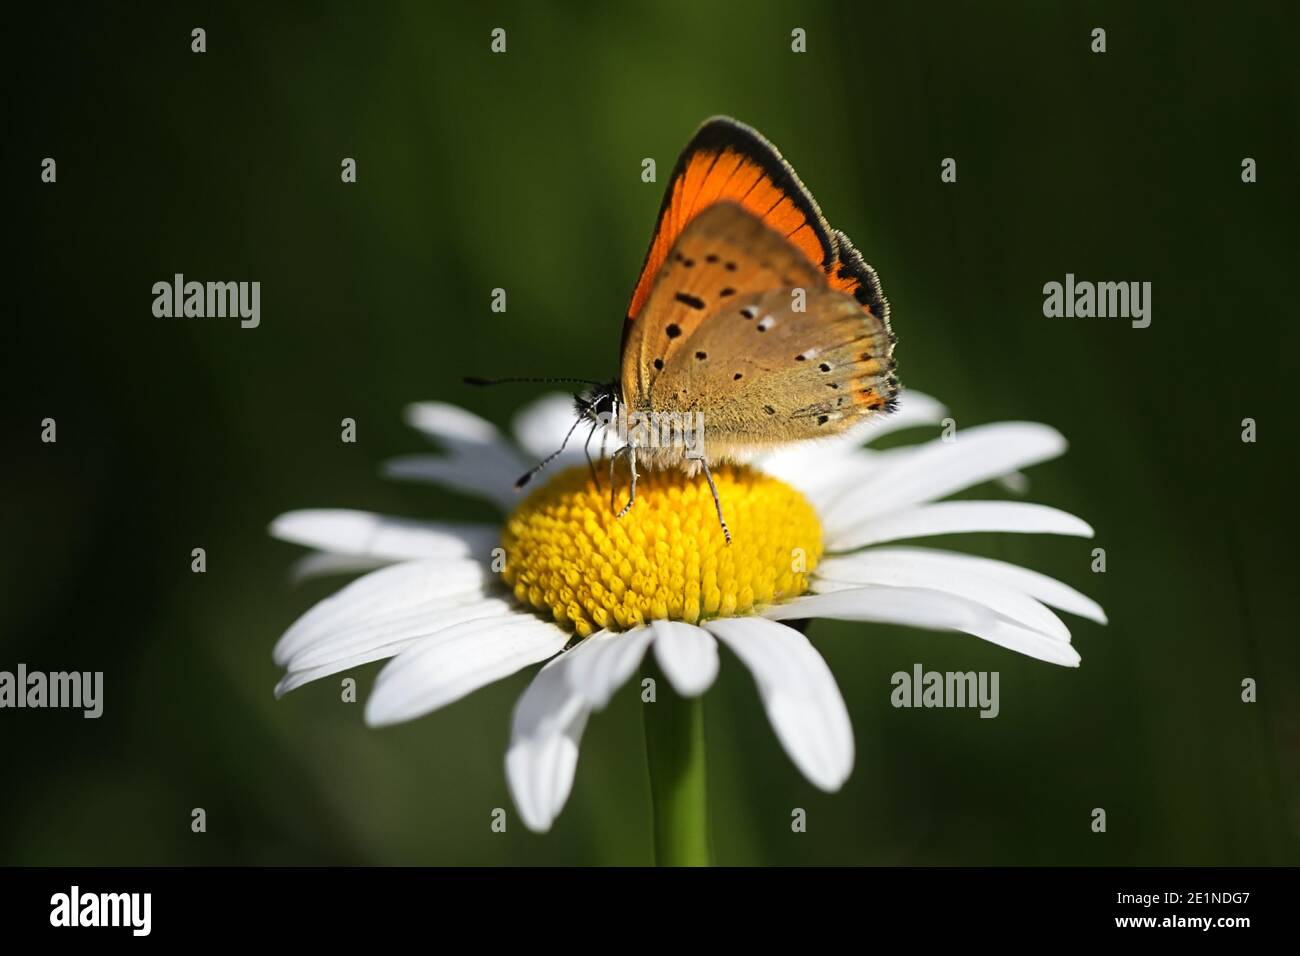 Lycaena virgaureae, known as scarce copper, a butterfly from Finland Stock Photo